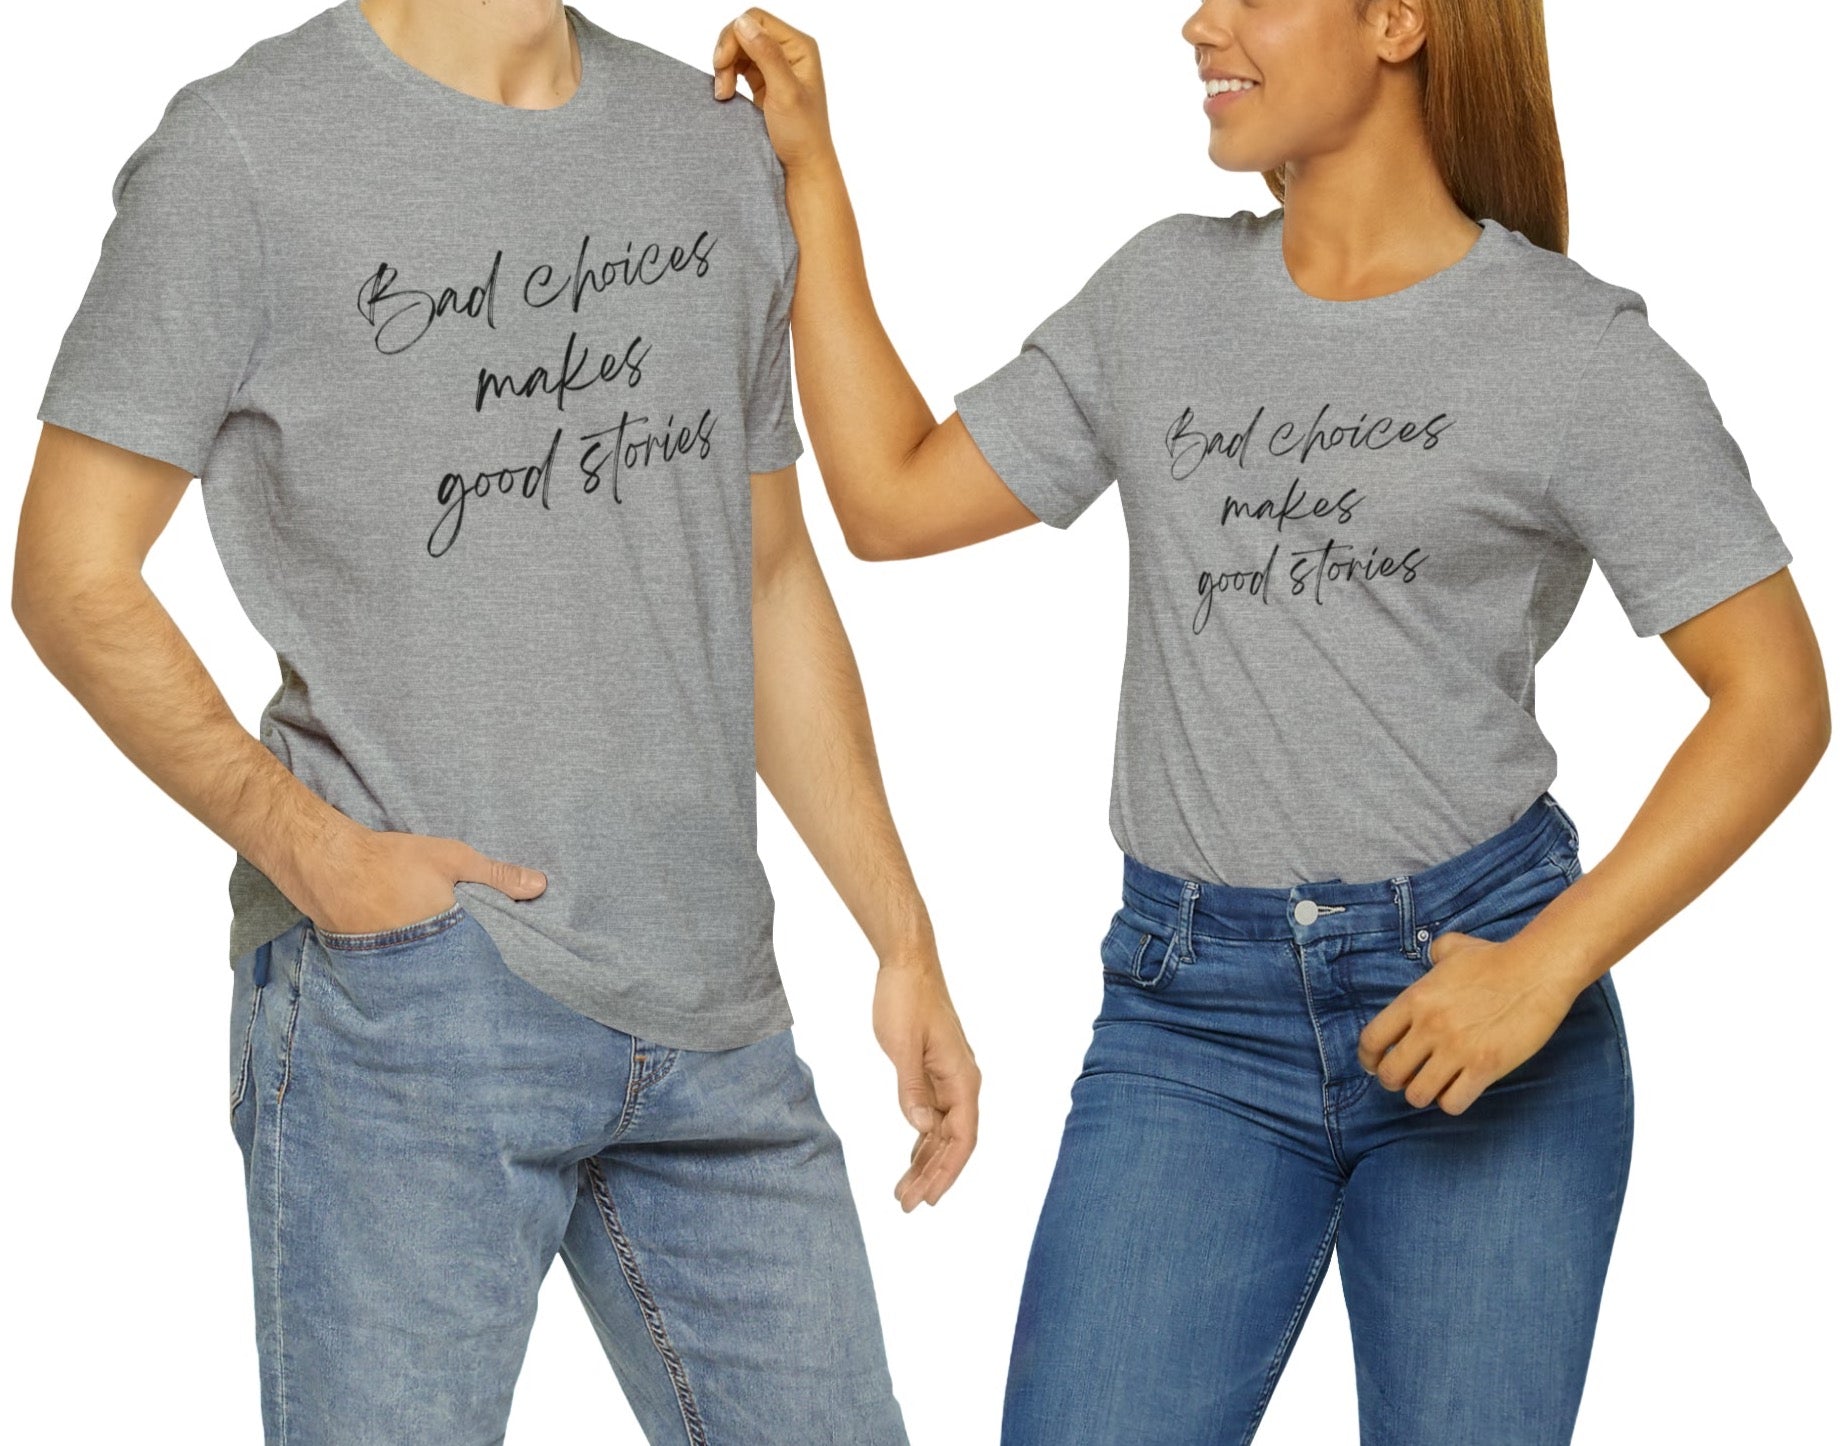 Bad choices makes good stories Jersey Short Sleeve T-shirt